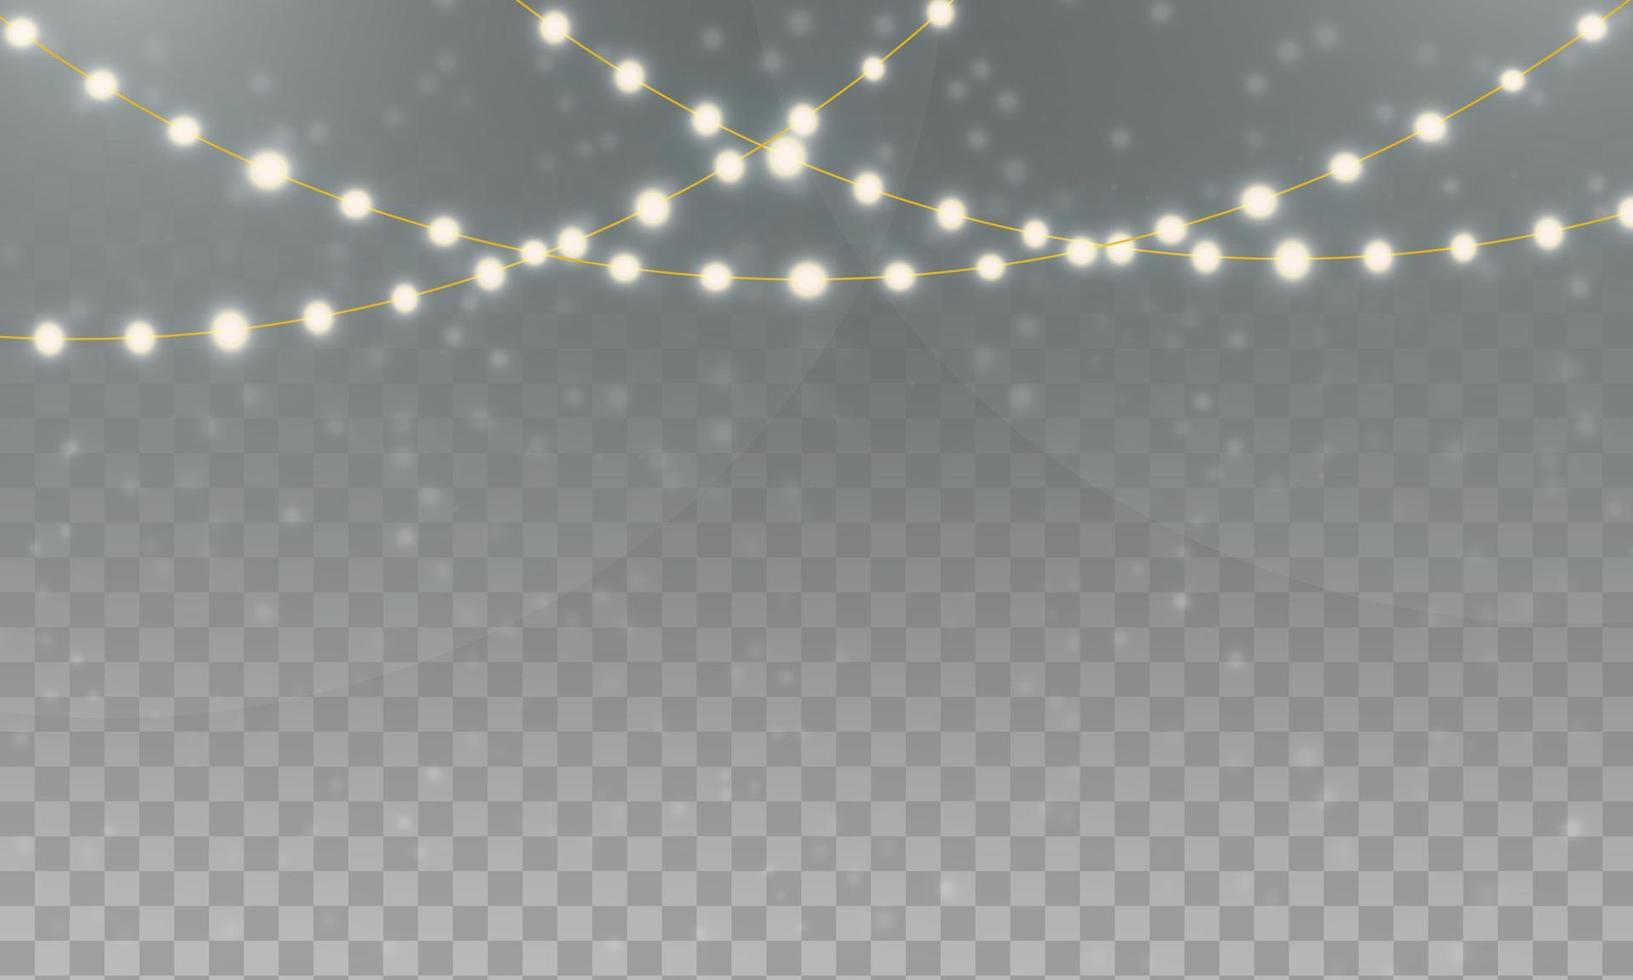 Christmas garland lights on wire string against snowfall background vector